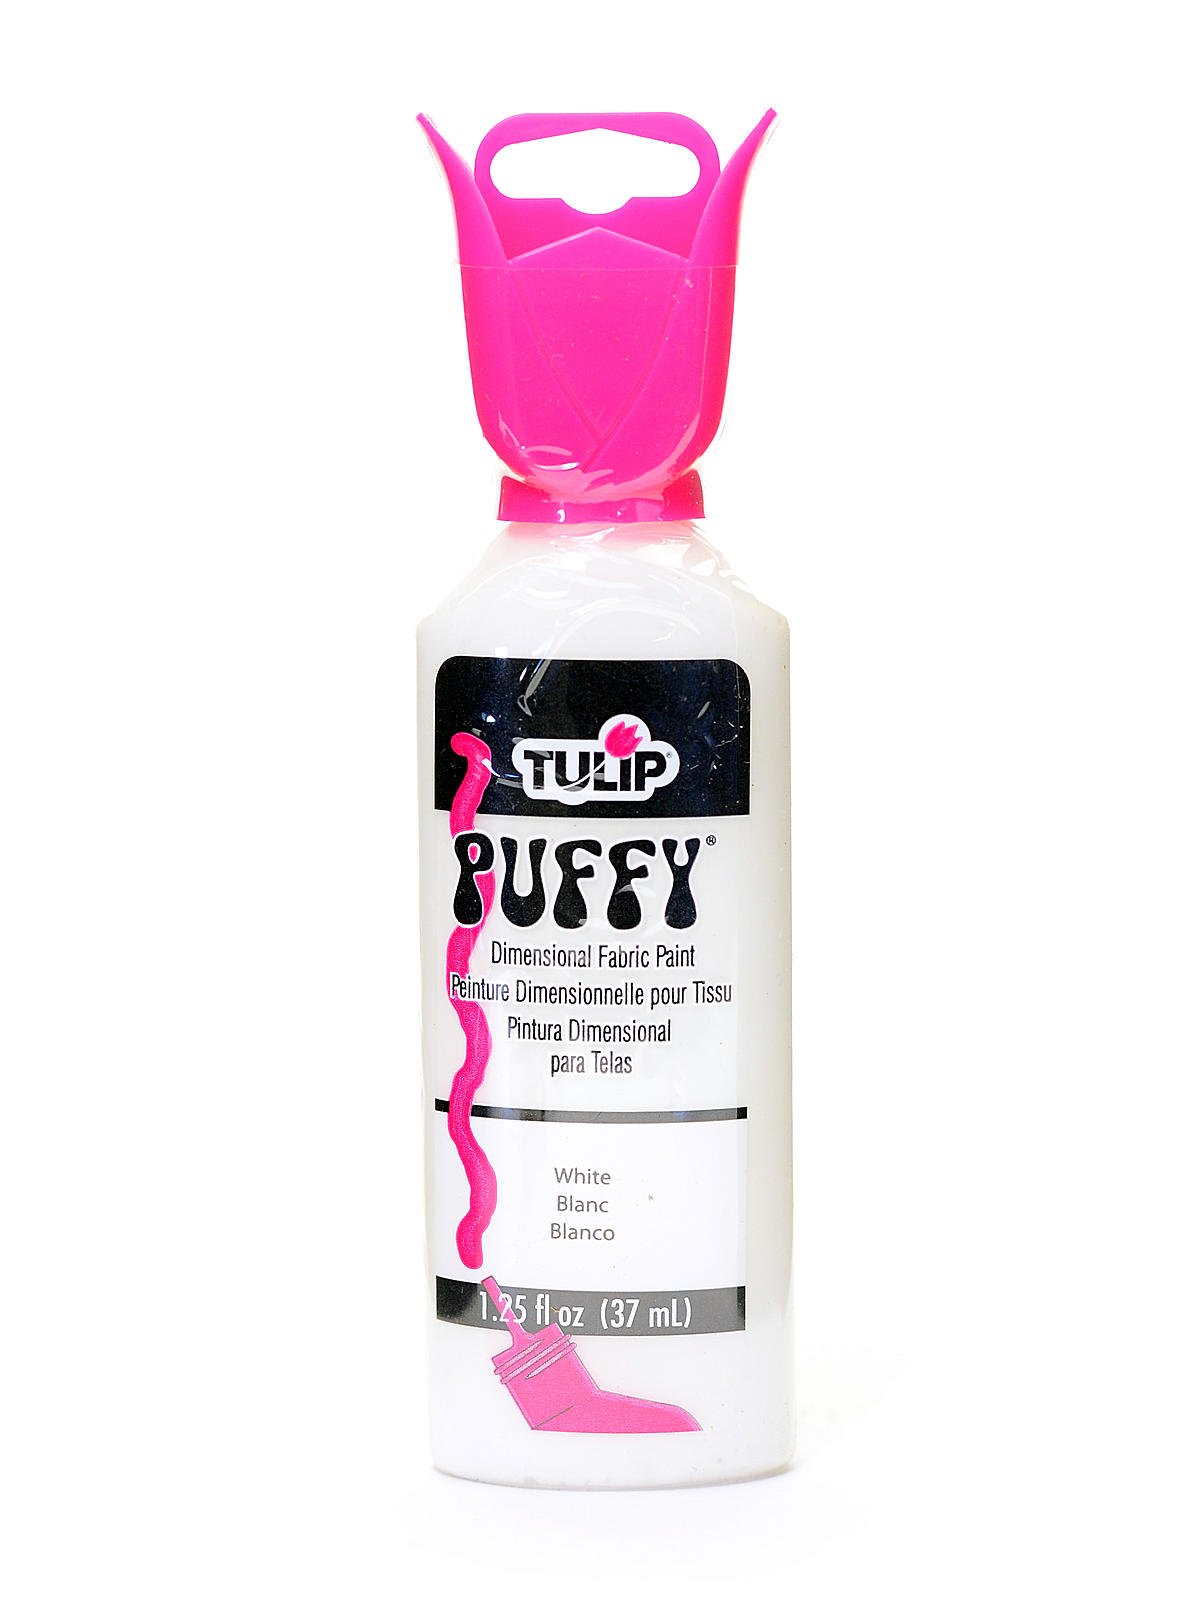 How to use Tulip Puffy 